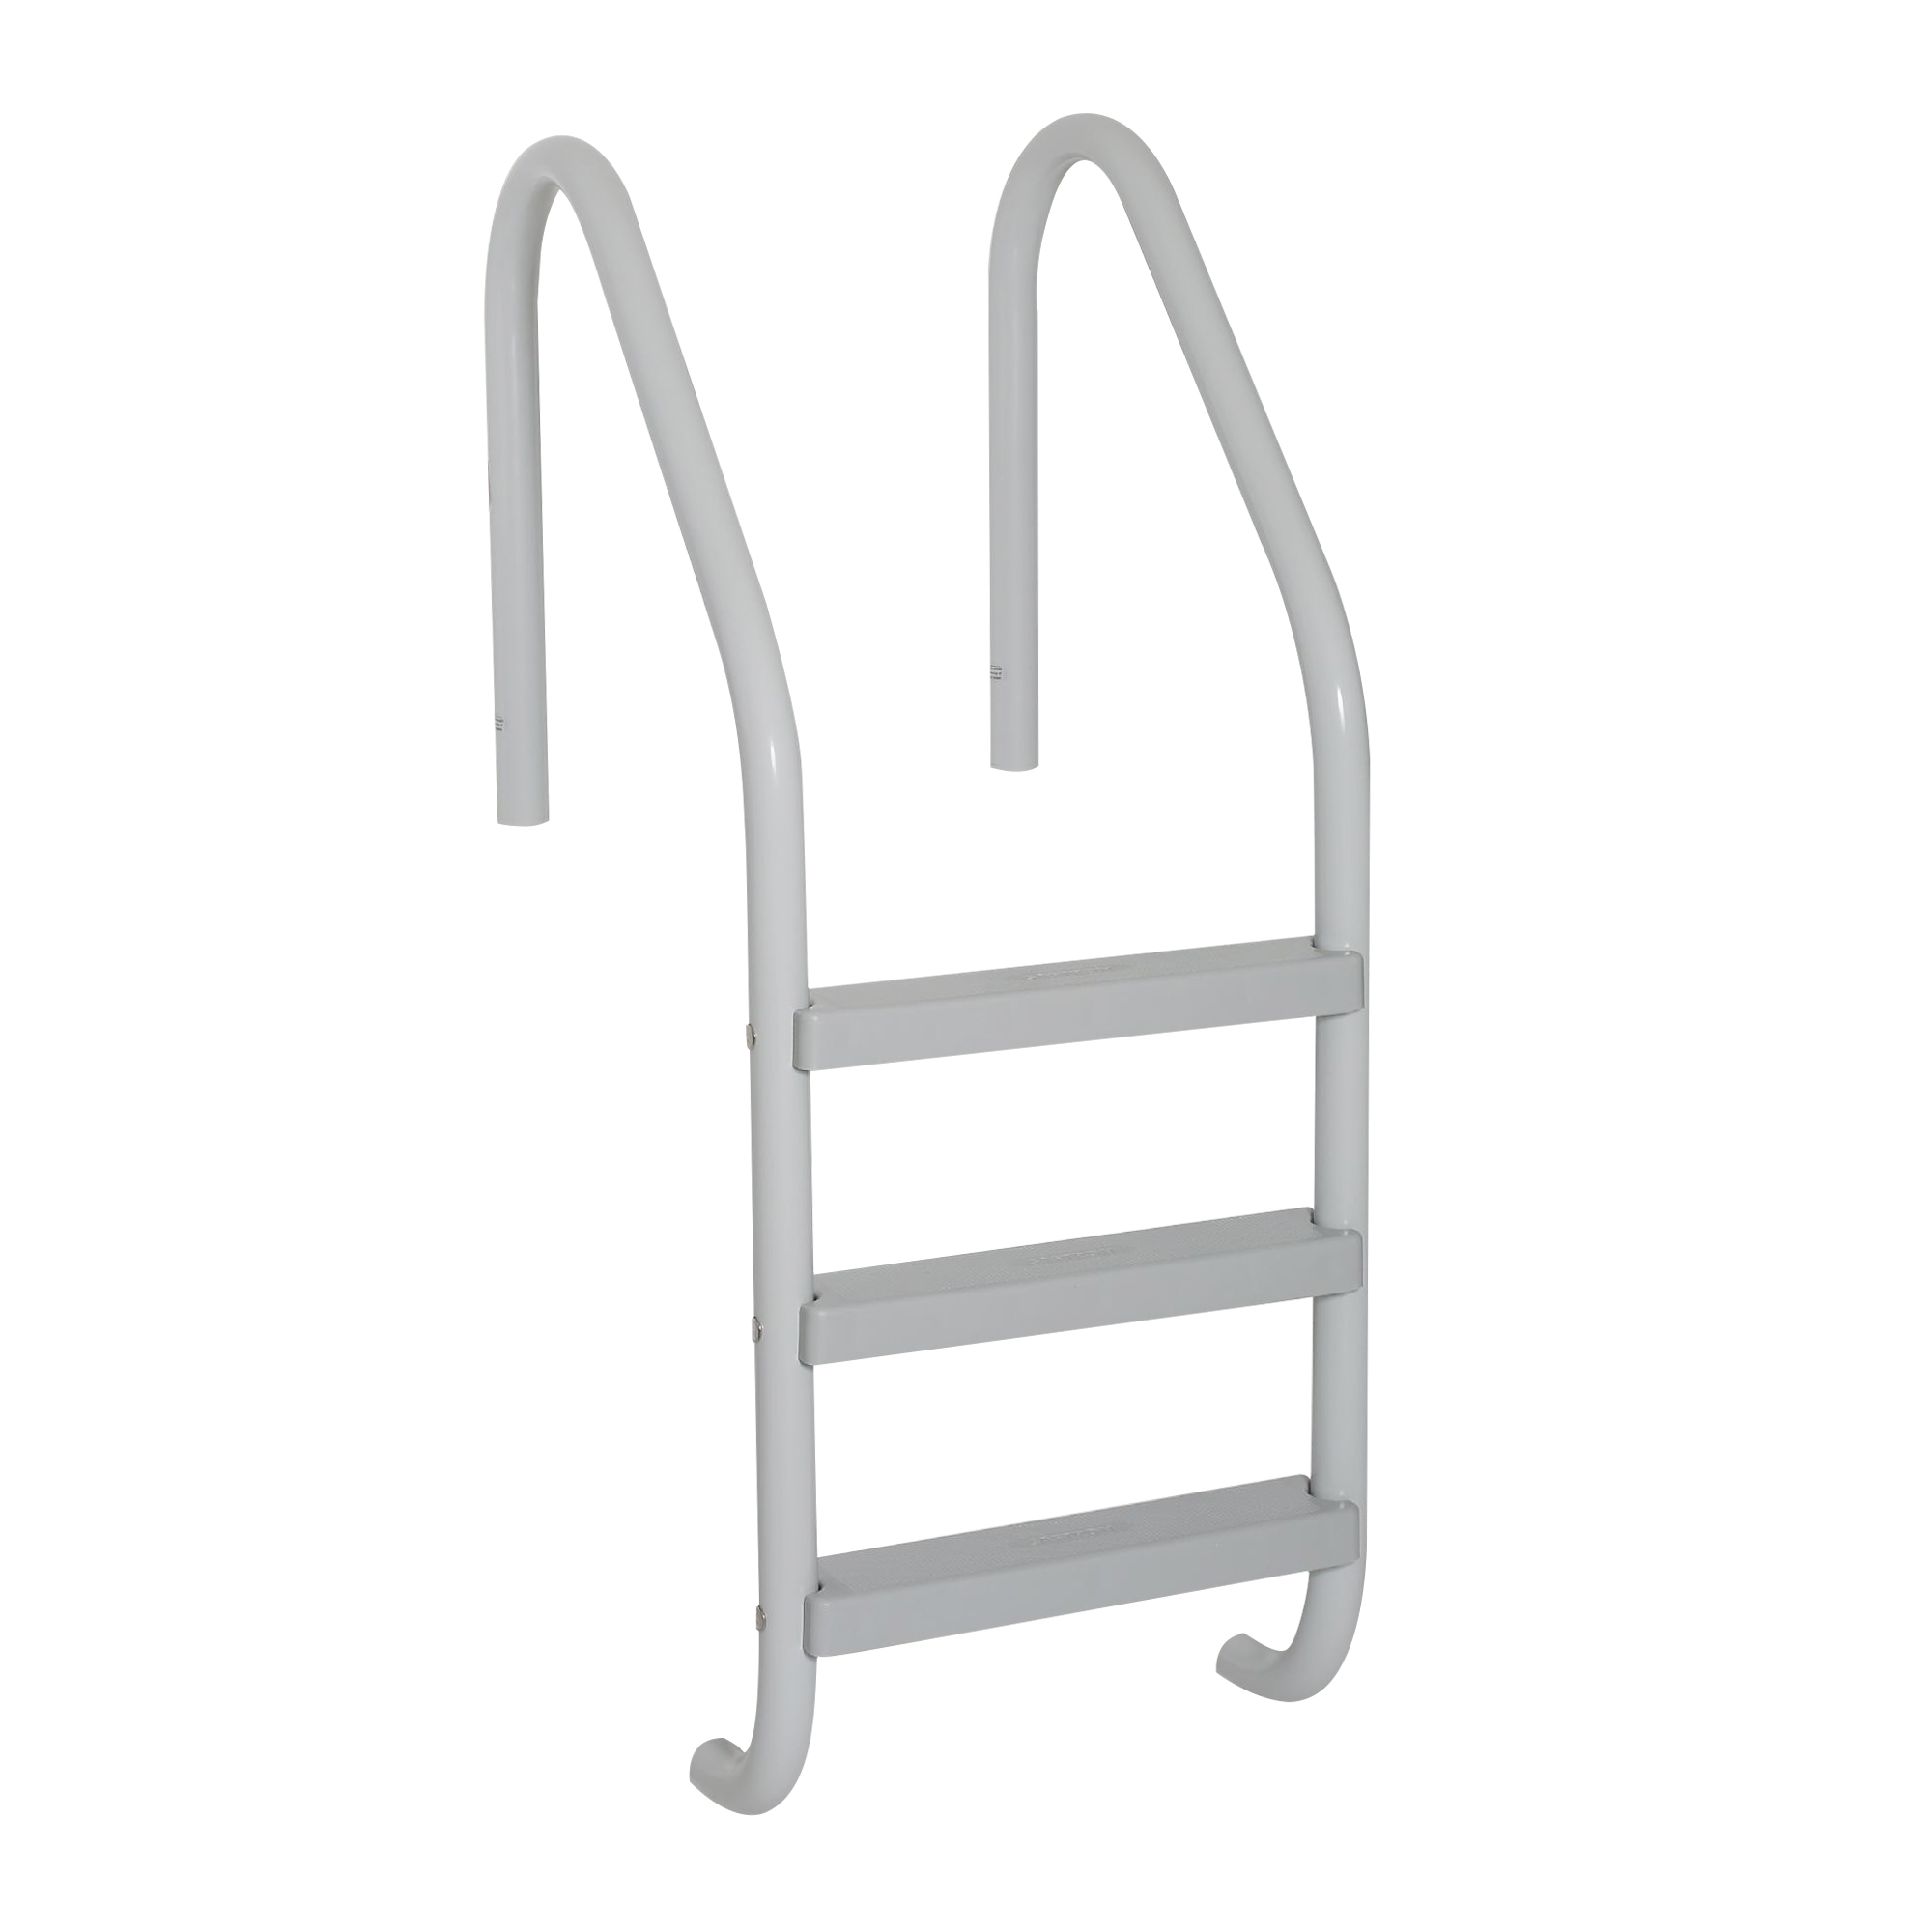 3 Step High Impact Polymer In-Ground Pool Ladder - Gray